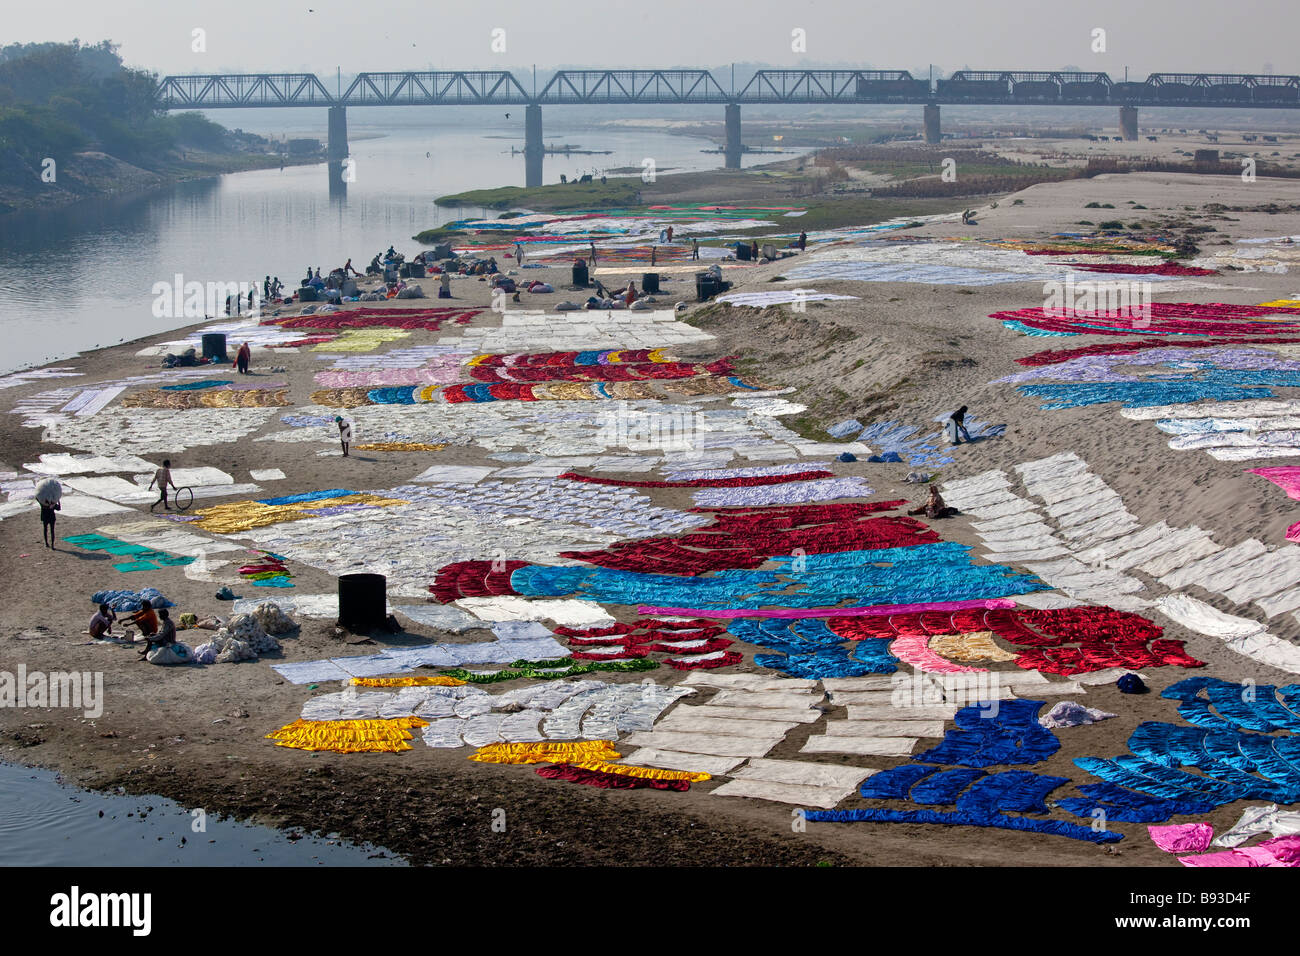 Dhobi Clothes Washers in the Yamuna River in Agra India Stock Photo